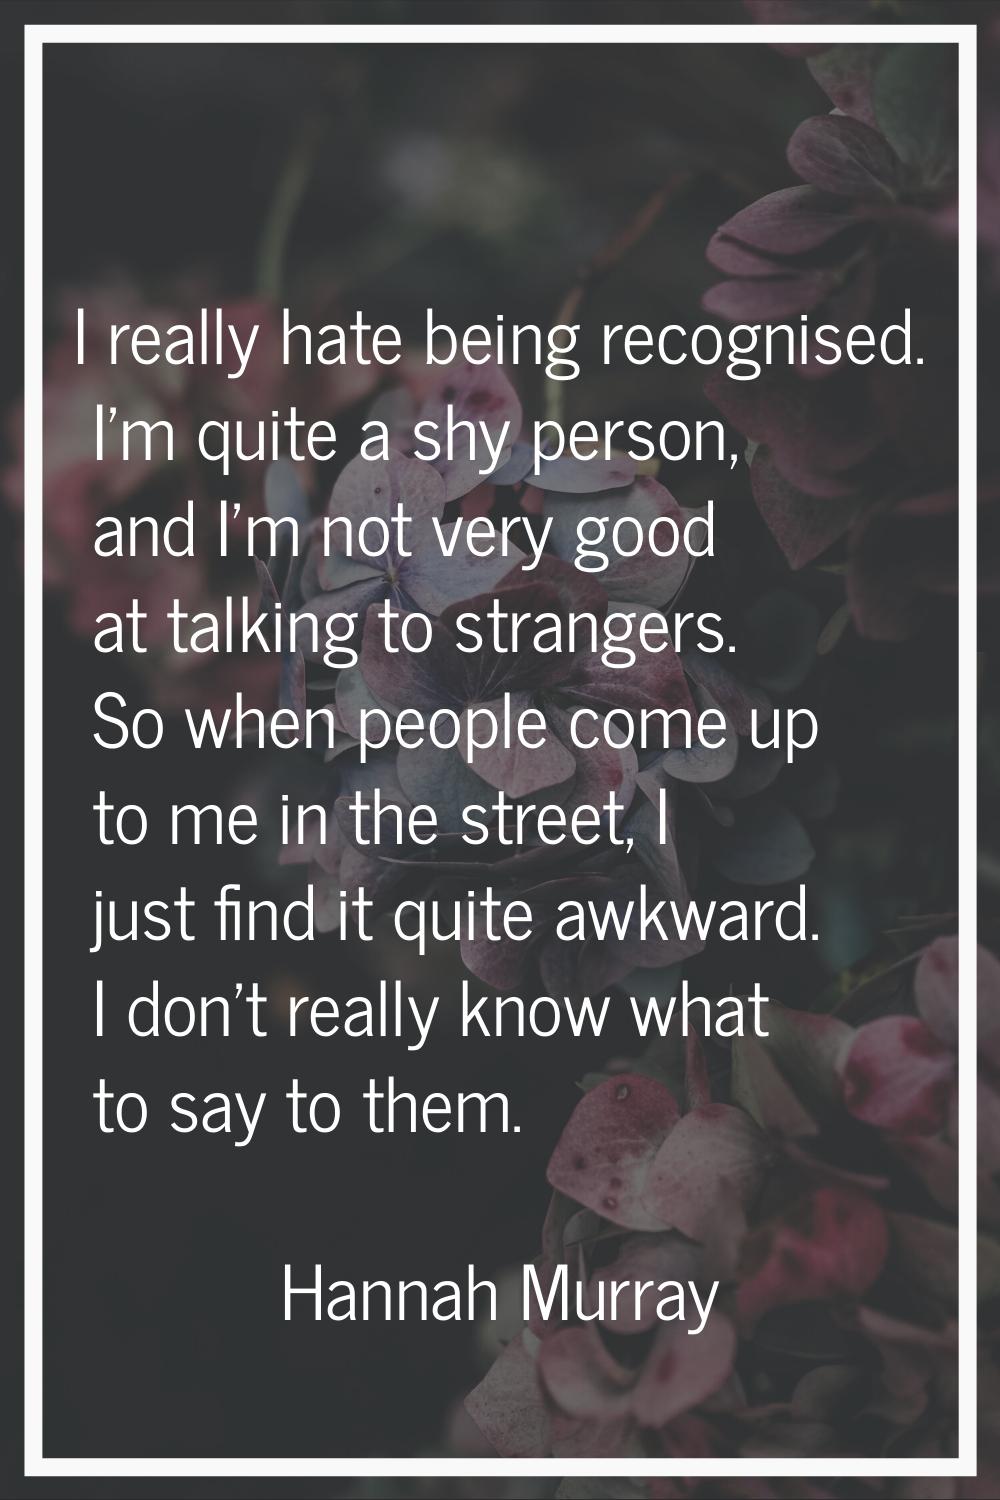 I really hate being recognised. I'm quite a shy person, and I'm not very good at talking to strange